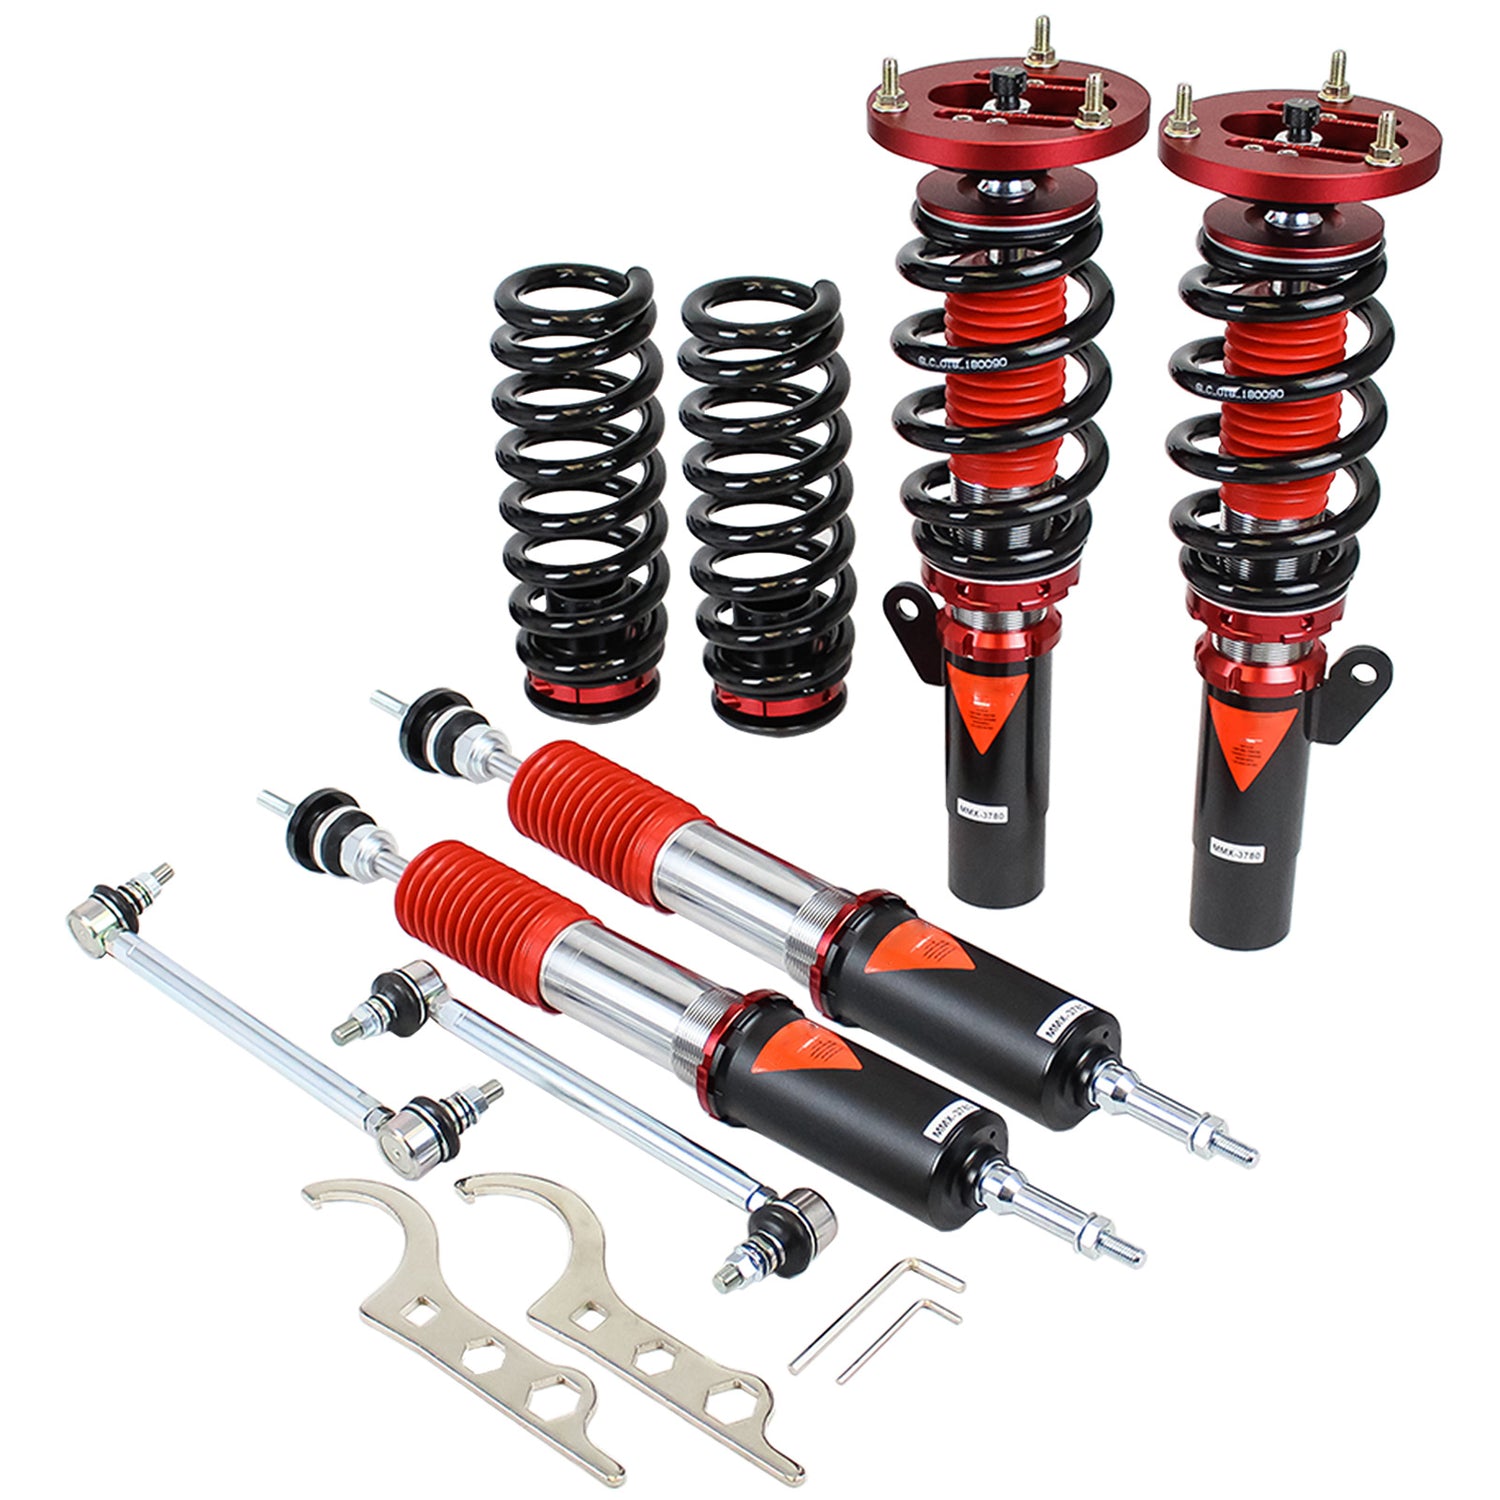 MMX3780 MAXX Coilovers Lowering Kit, Fully Adjustable, Ride Height, 40 Clicks Rebound Settings, BMW X1 sDrive(E84) 10-15